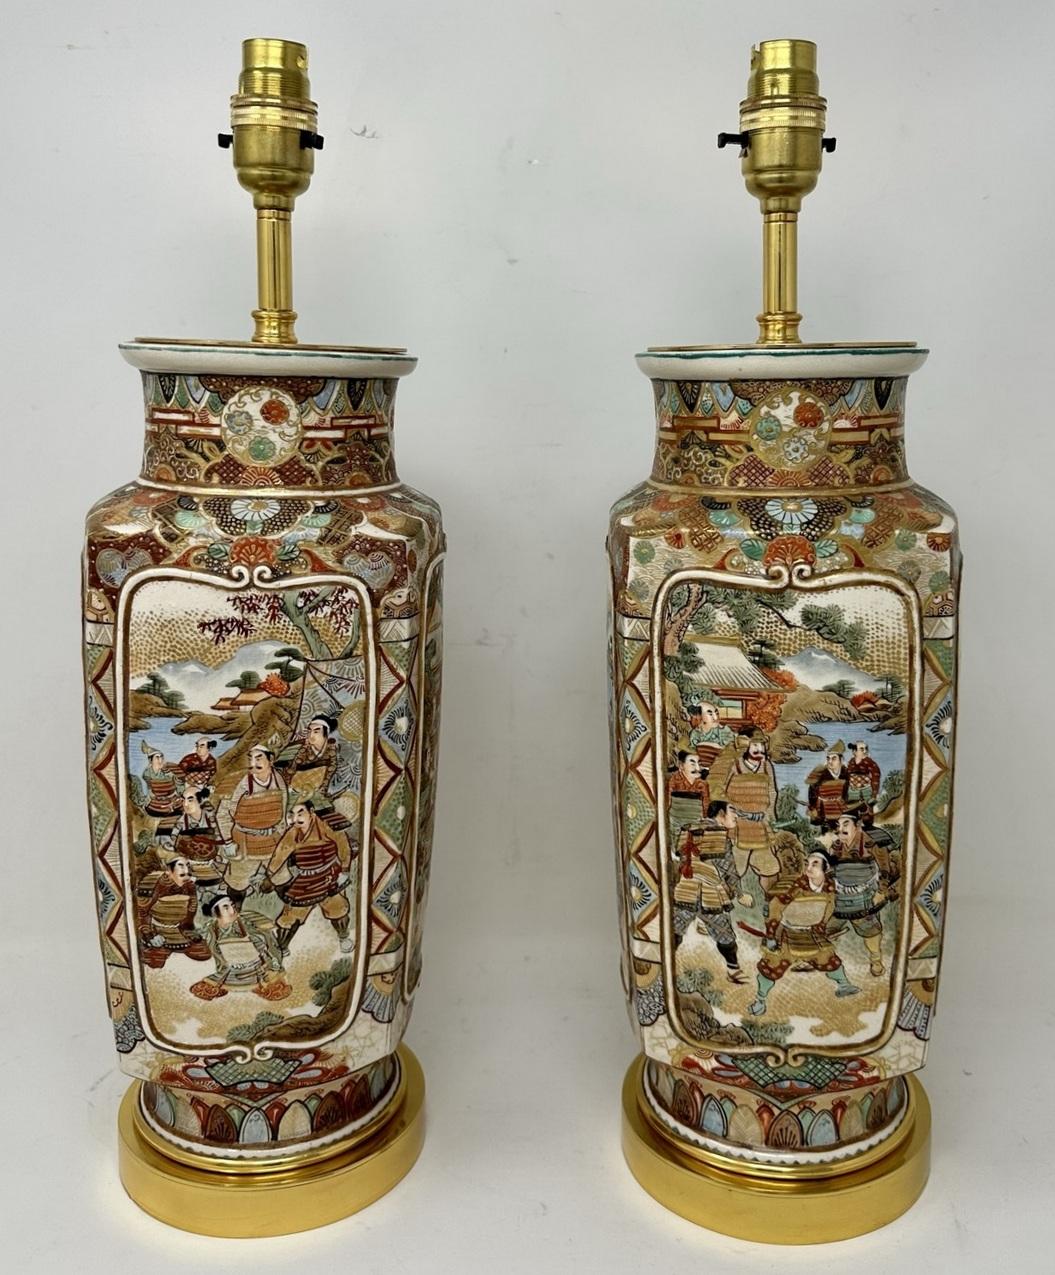 Antique Pair Japanese Satsuma Table Lamps Vases Urns Meiji Period 1868-1912  In Excellent Condition For Sale In Dublin, Ireland